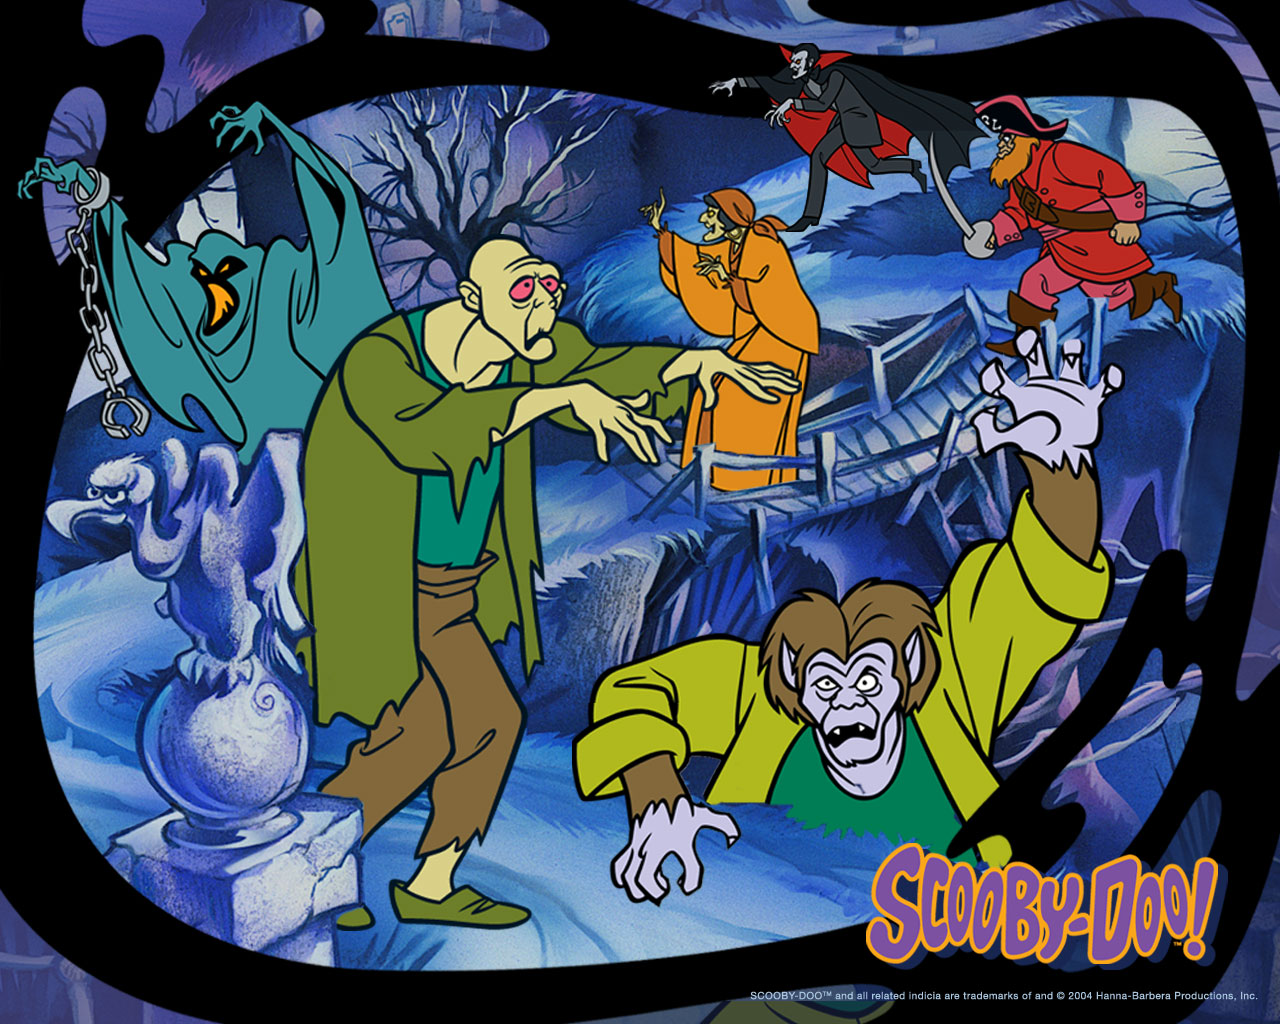 Top 999+ Scooby Doo Wallpaper Full HD, 4K✓Free to Use